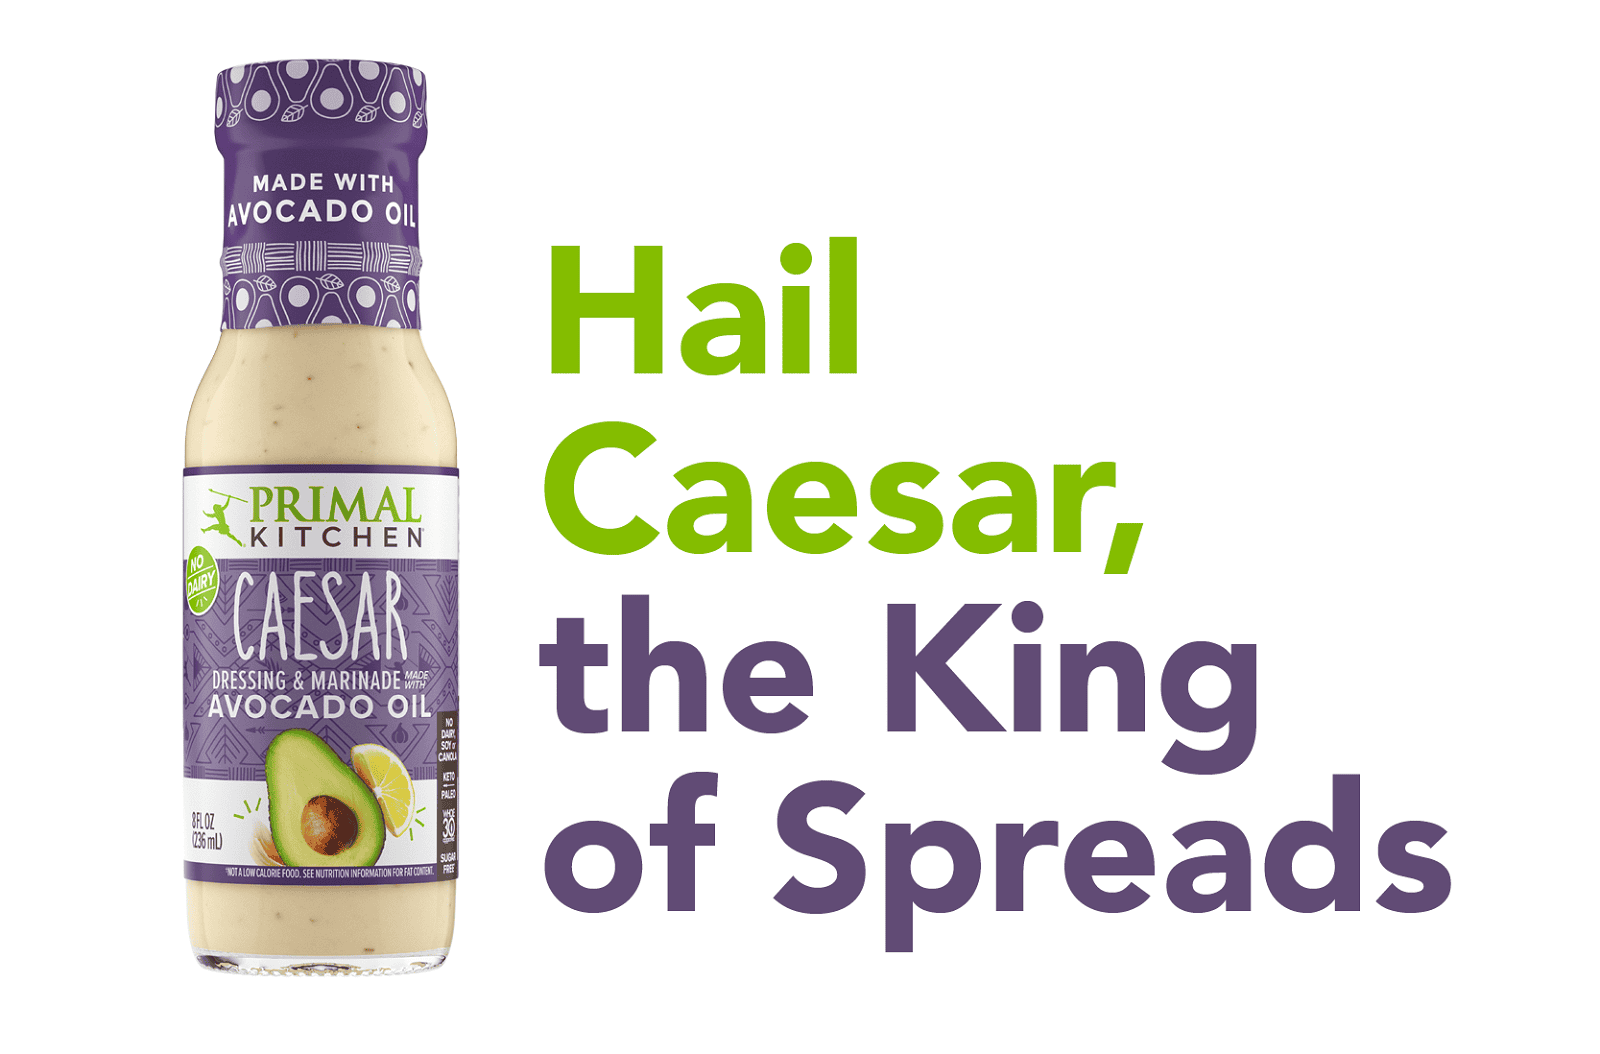 Hail Caesar, the King of Spreads